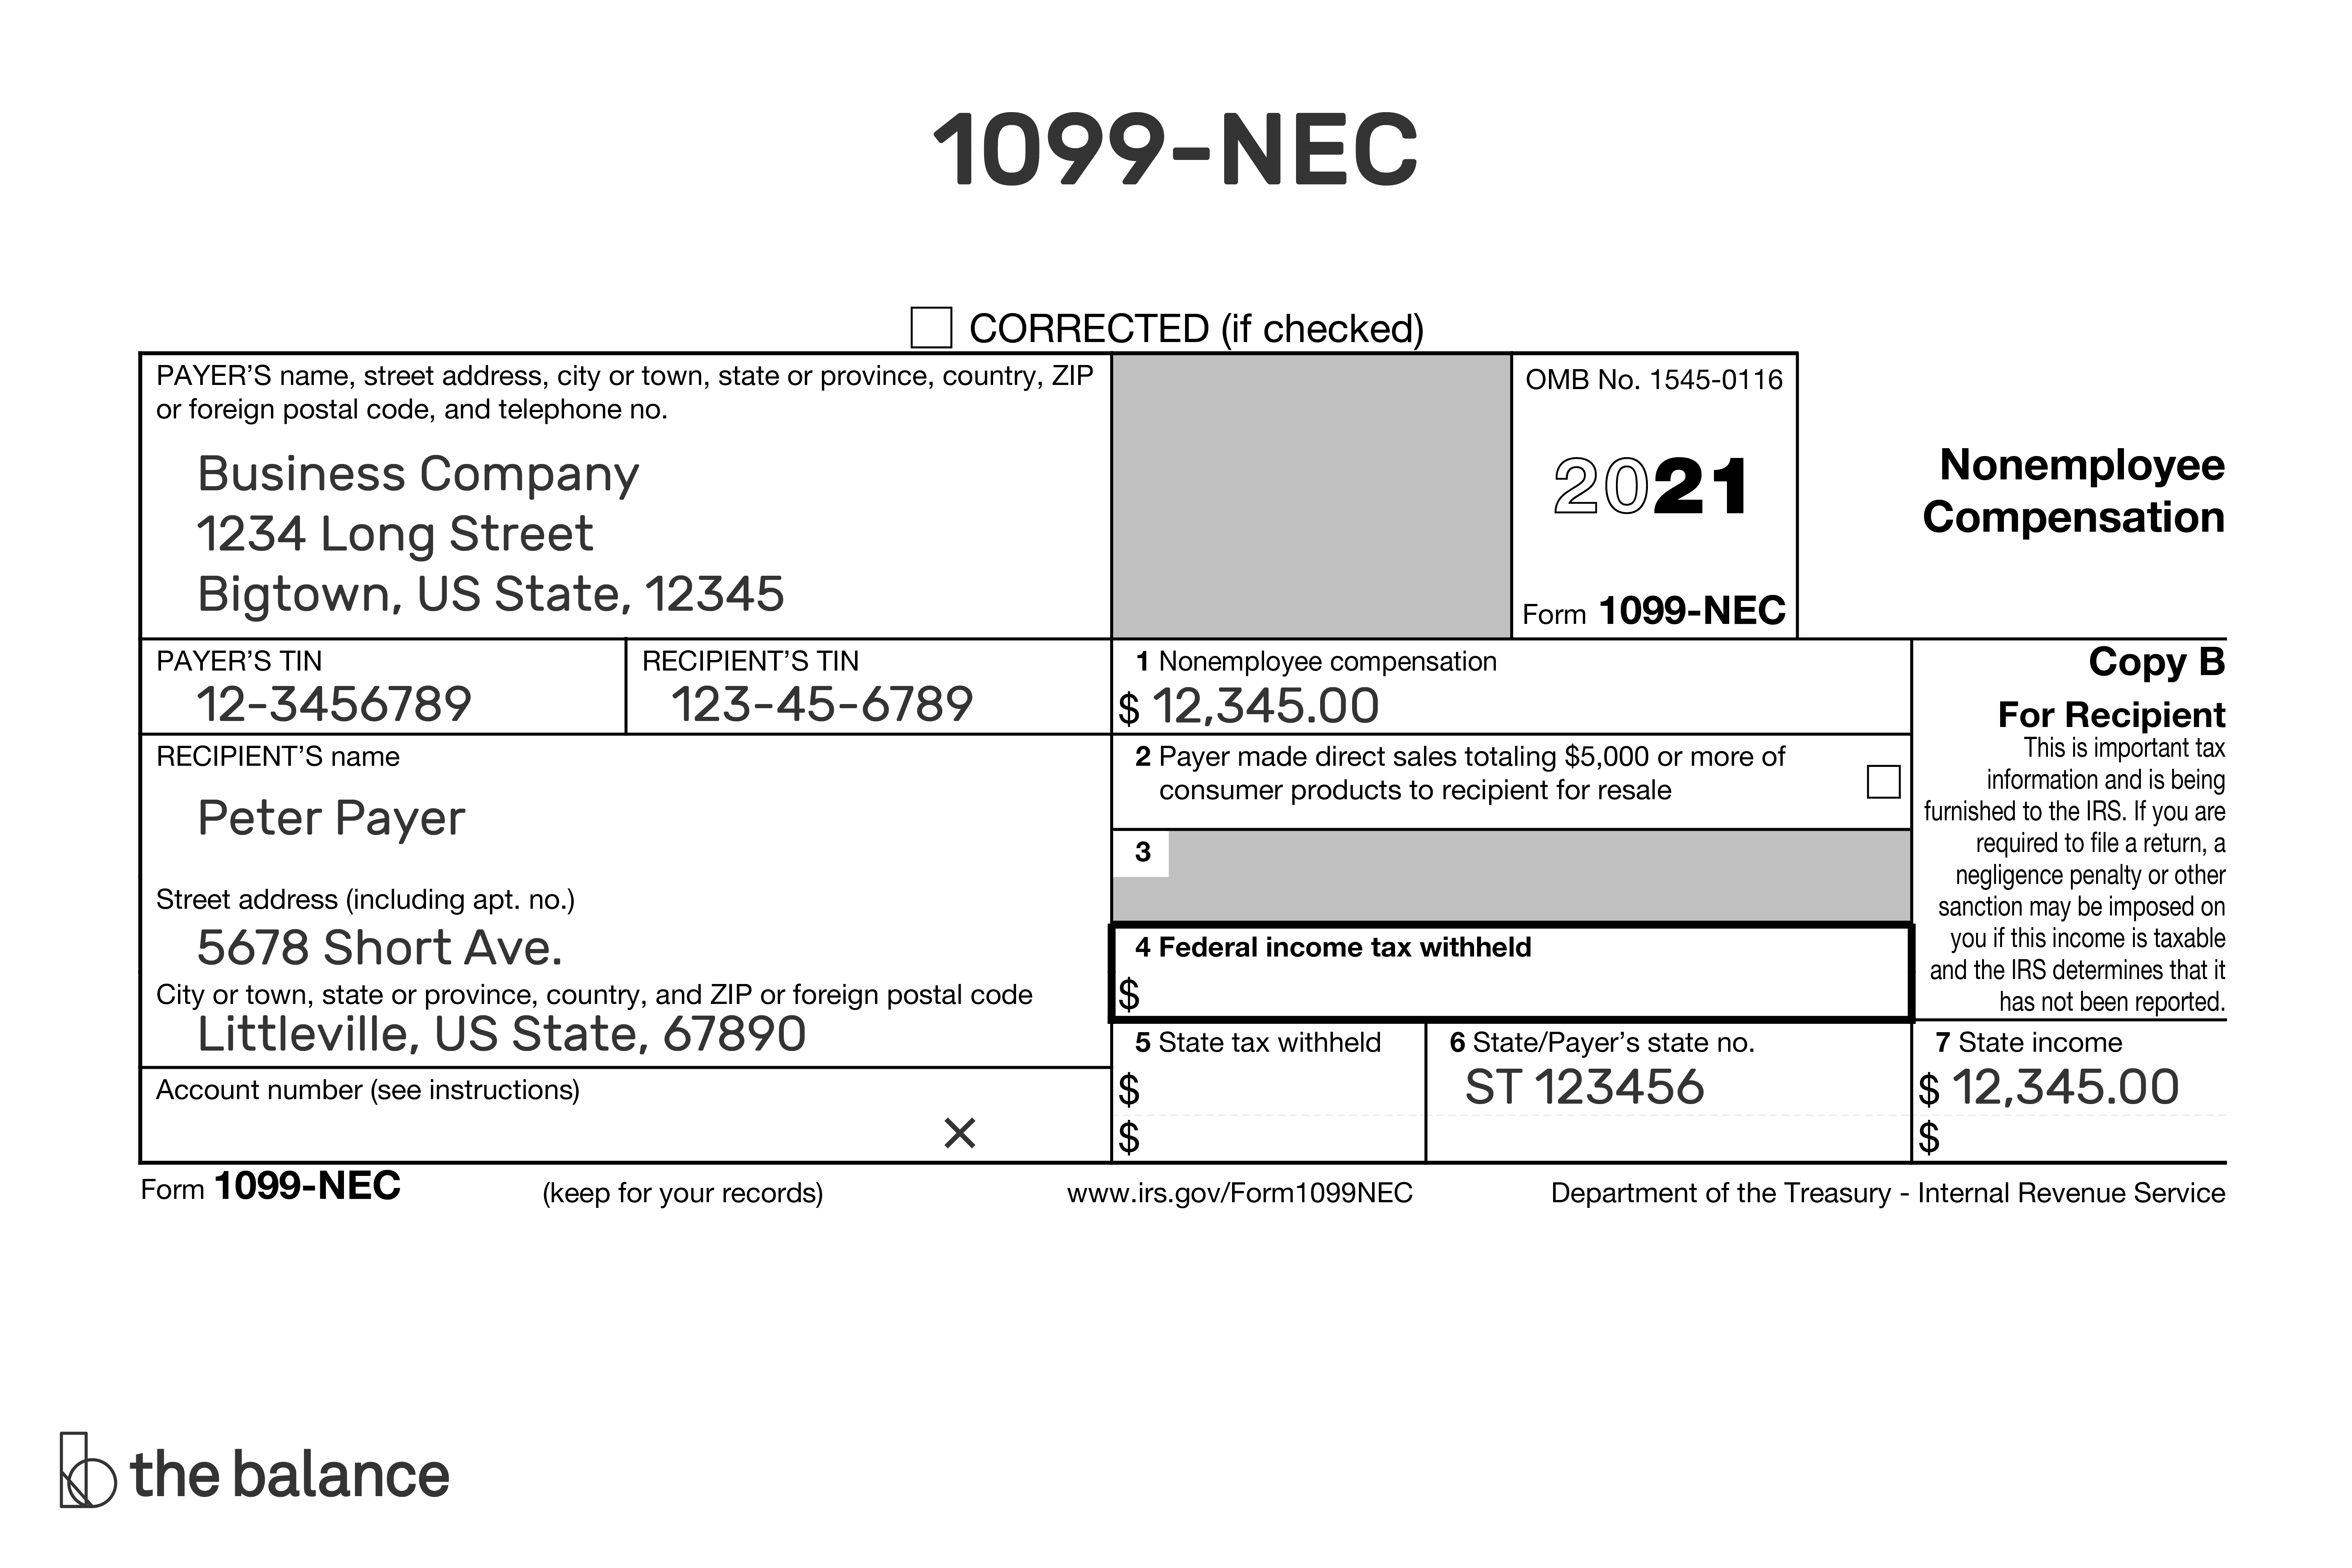 How To Report And Pay Taxes On 1099 NEC Income